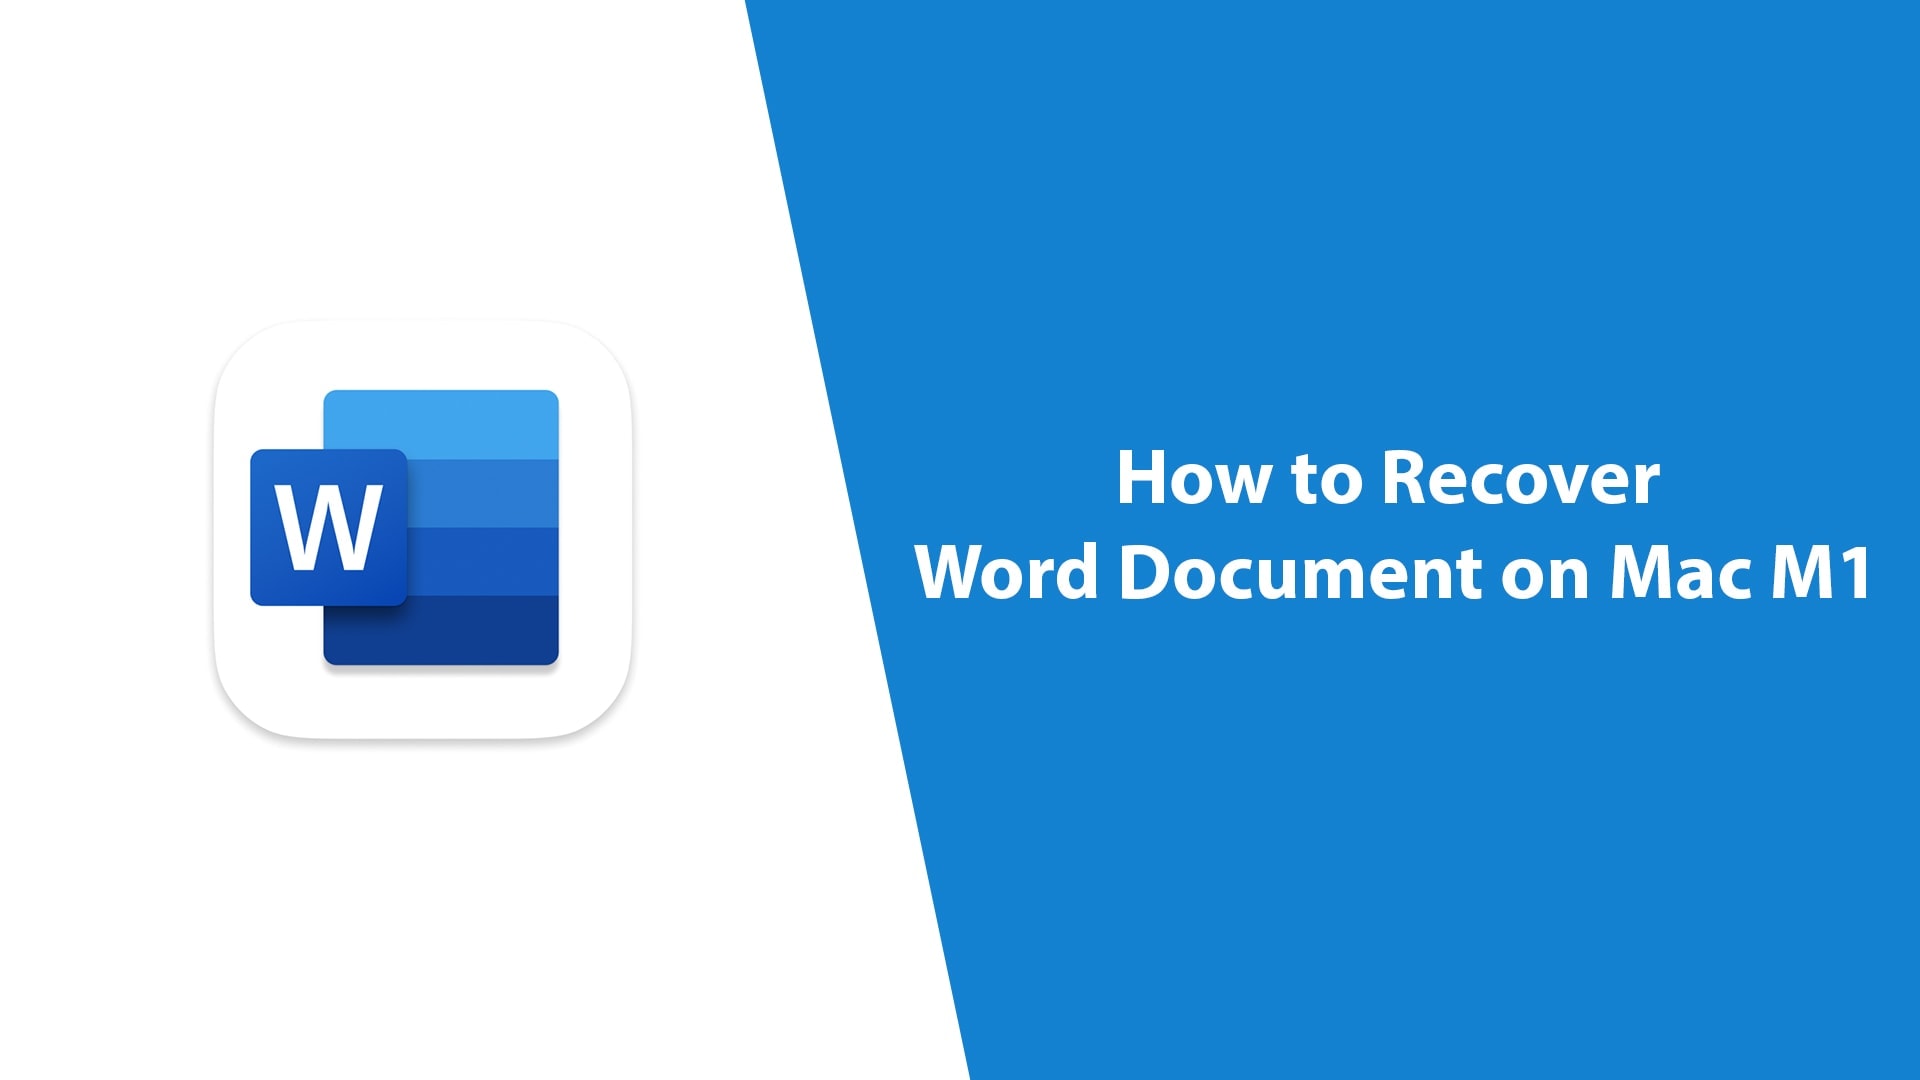 ms word on mac recover document